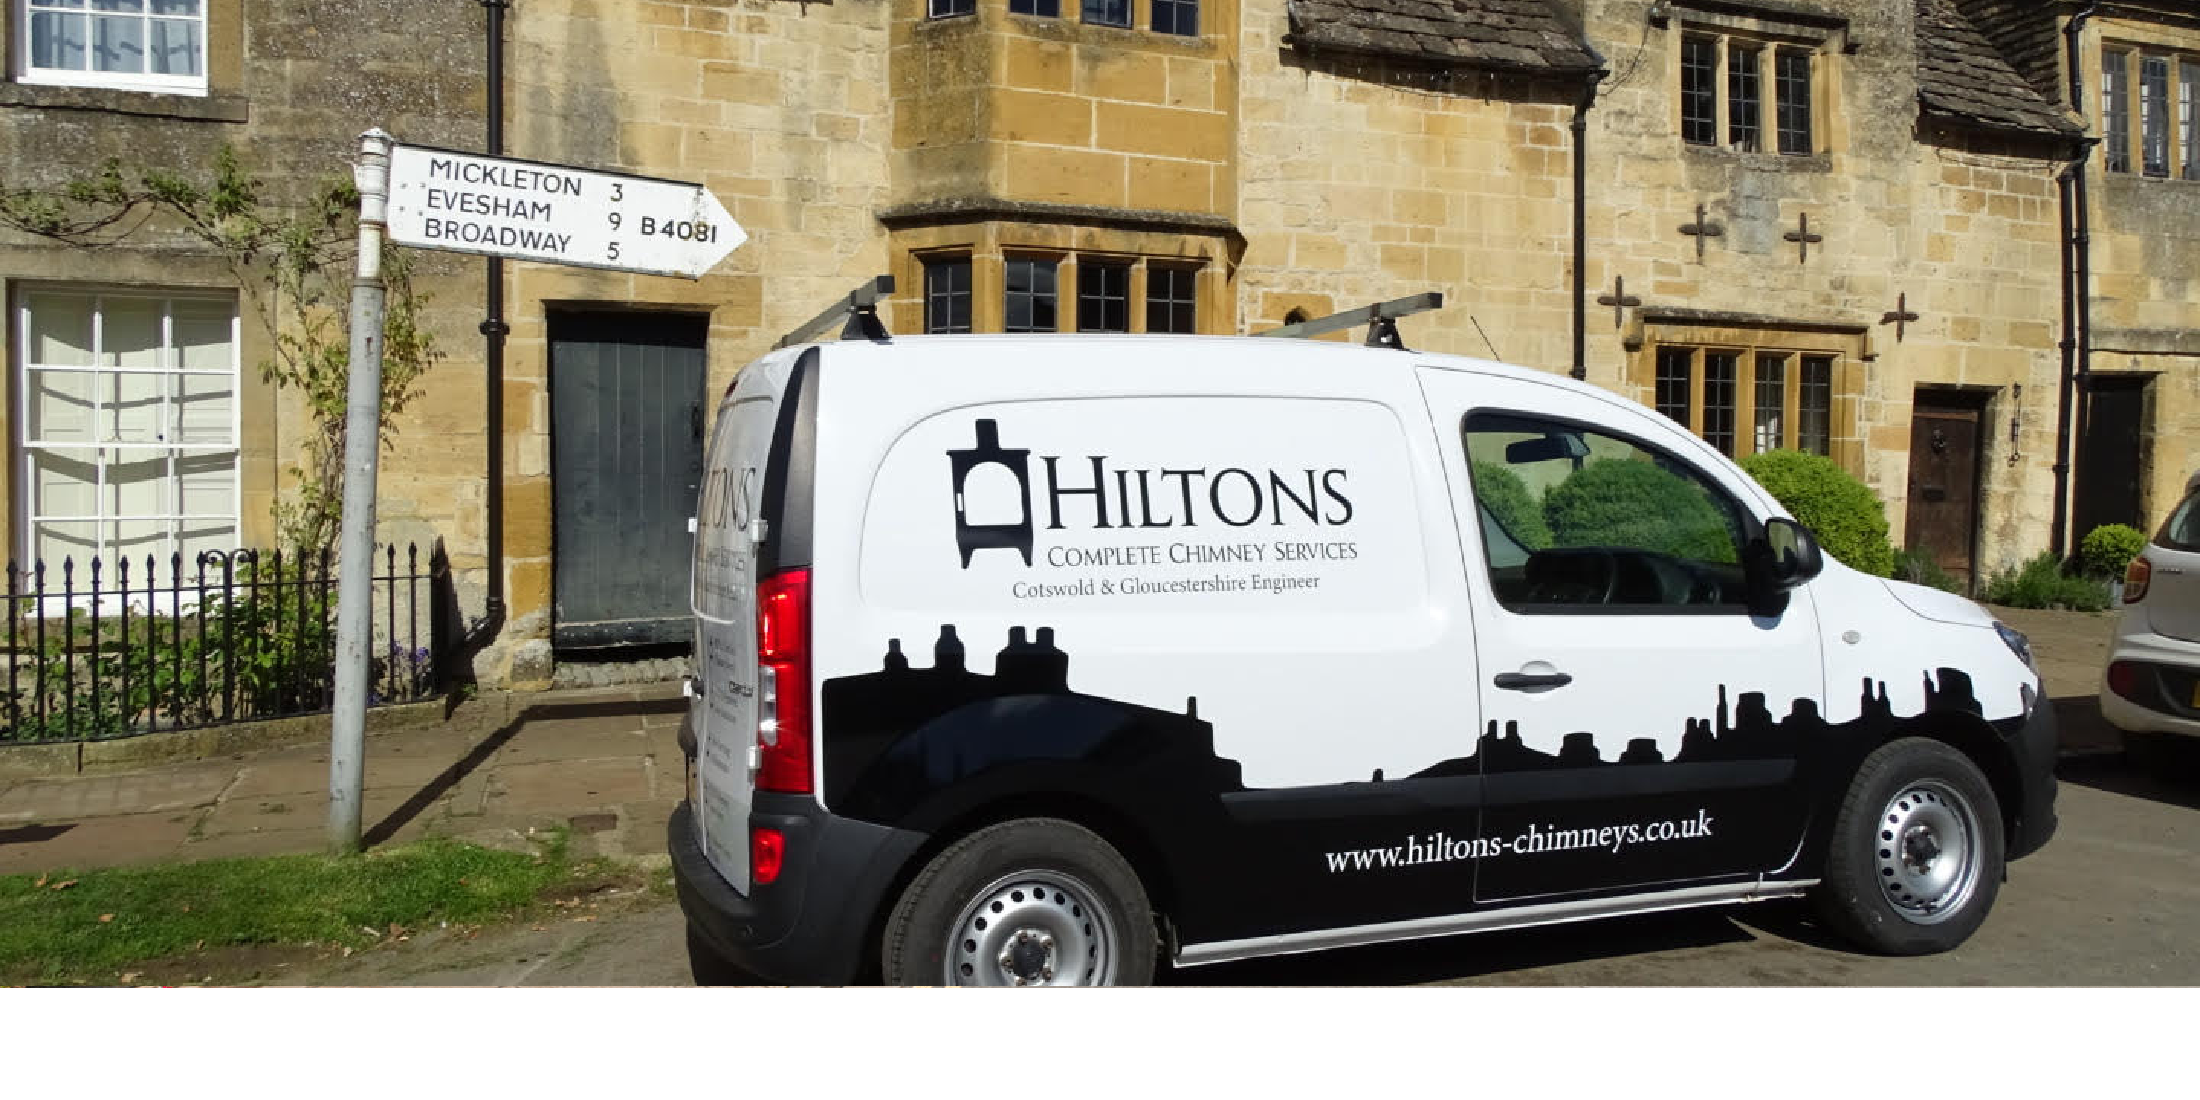 Hiltons Chimneys Van in Chipping Campden Gloucestershire